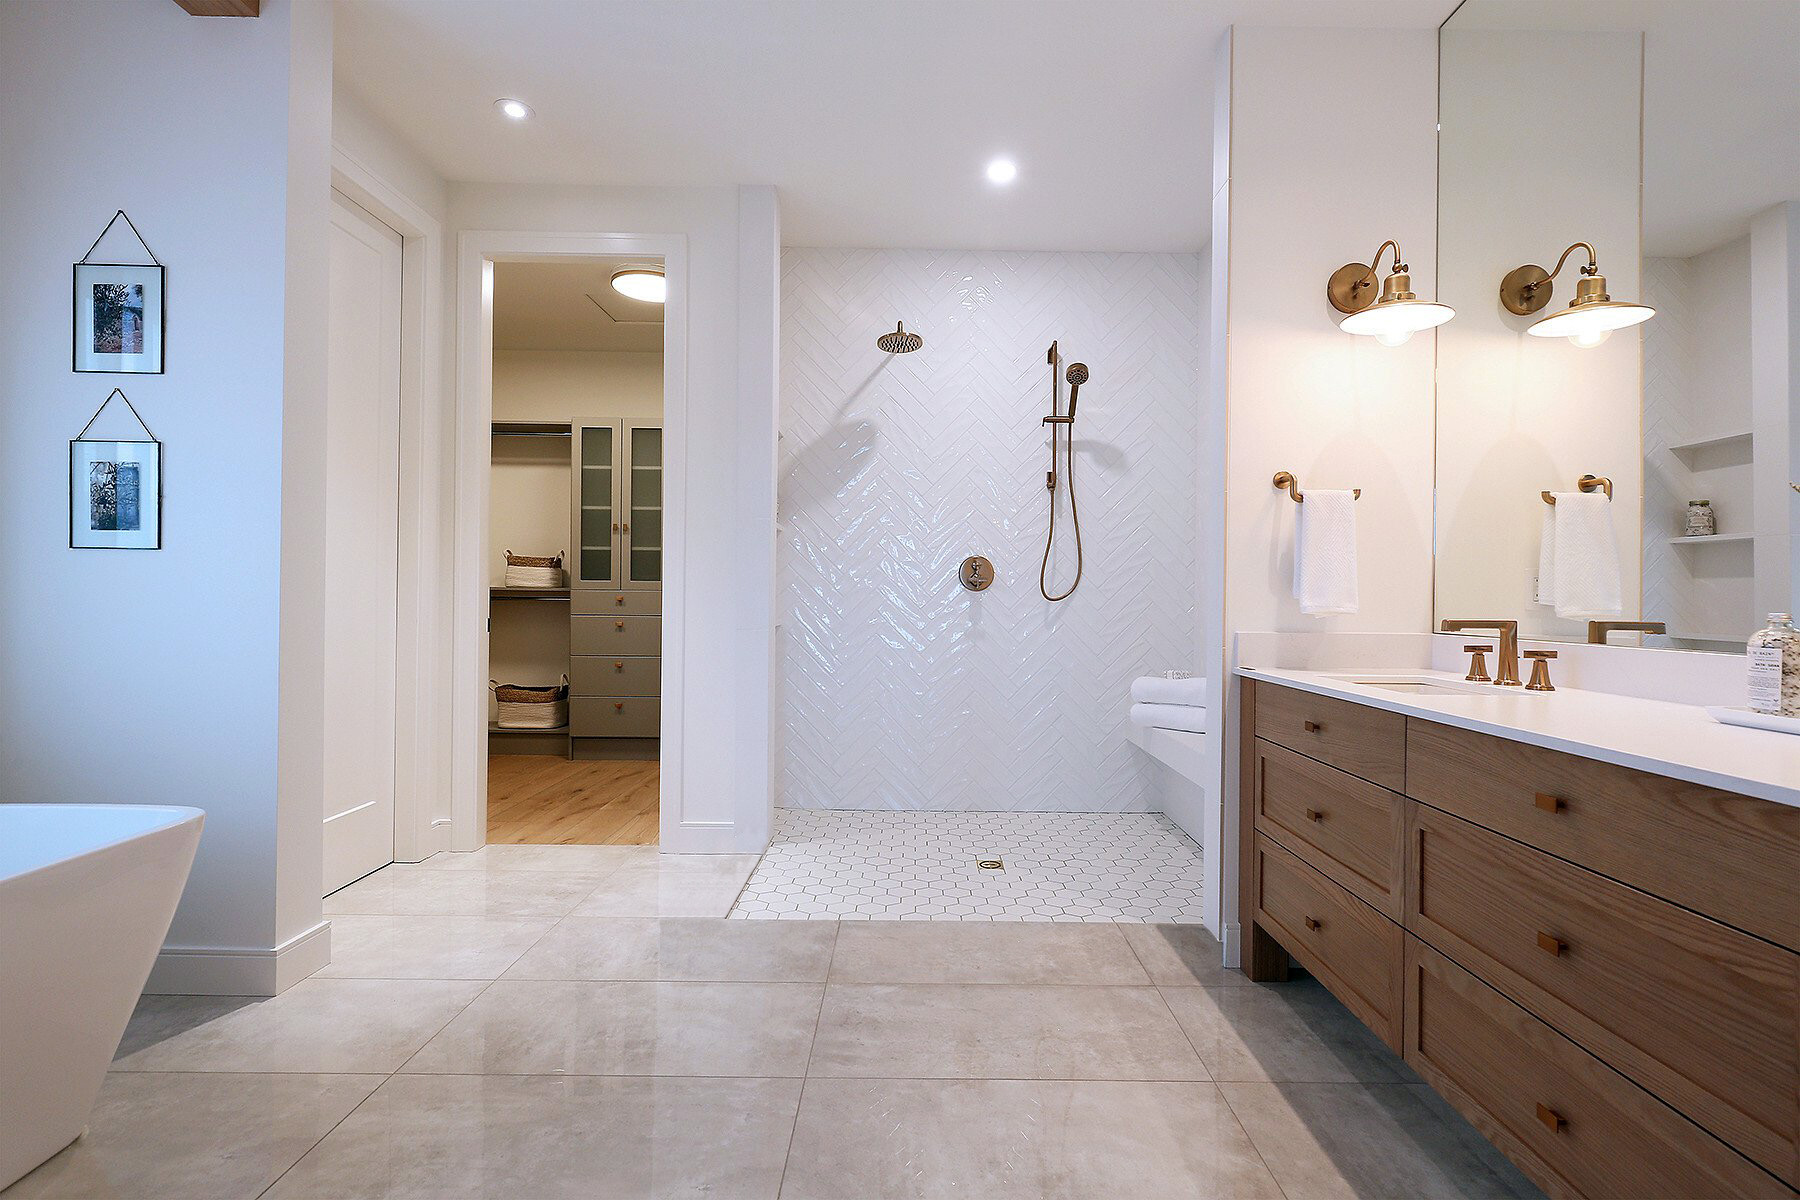 Roll in shower with white porcelain tiles, bench seating and multiple shower heads.